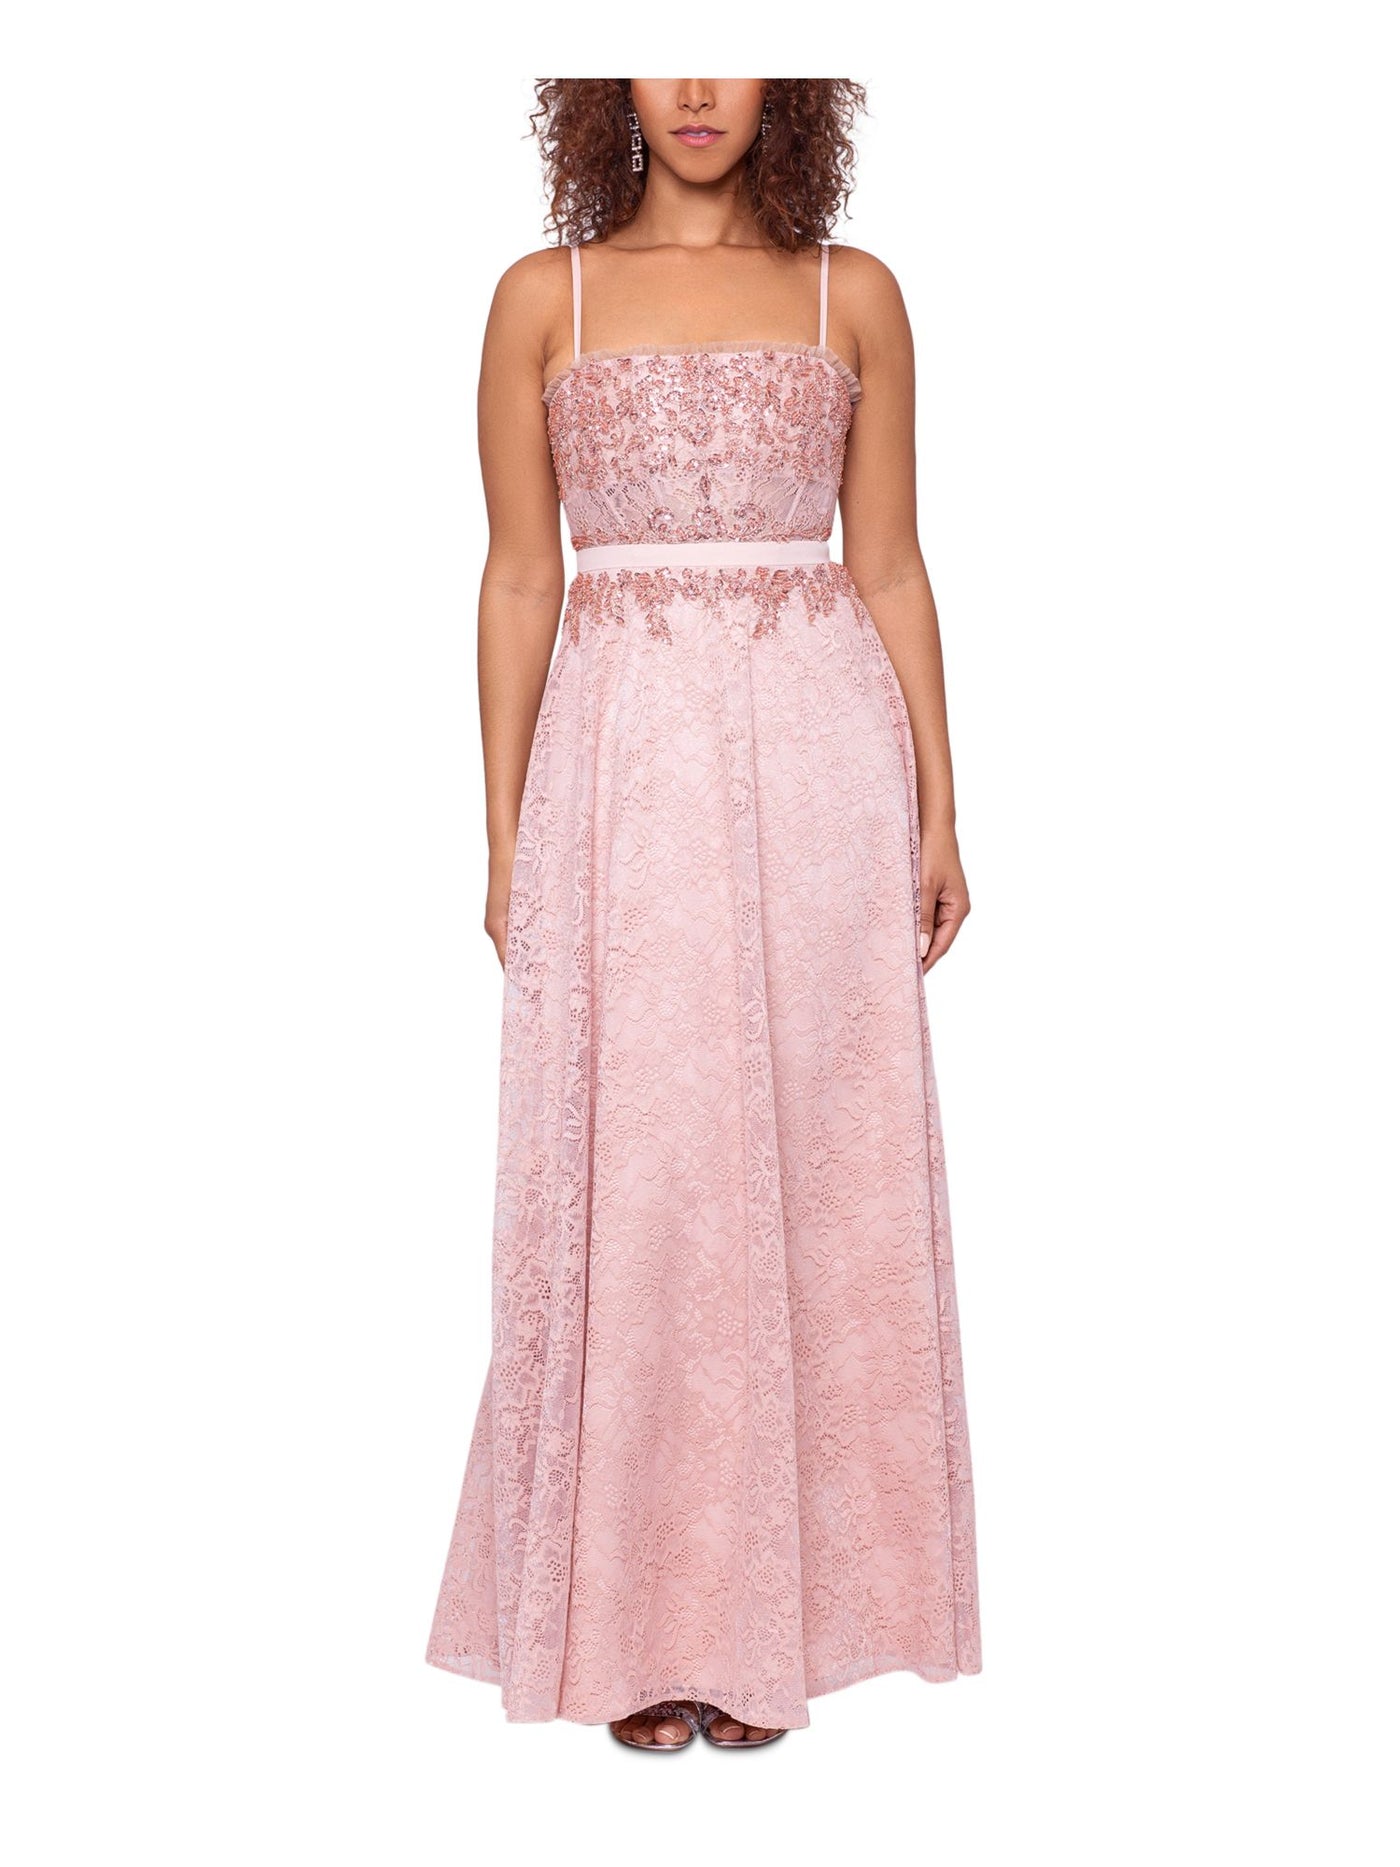 BETSY & ADAM Womens Pink Embellished Adjustable Lined Zippered Lace Spaghetti Strap Square Neck Full-Length Formal Gown Dress 10